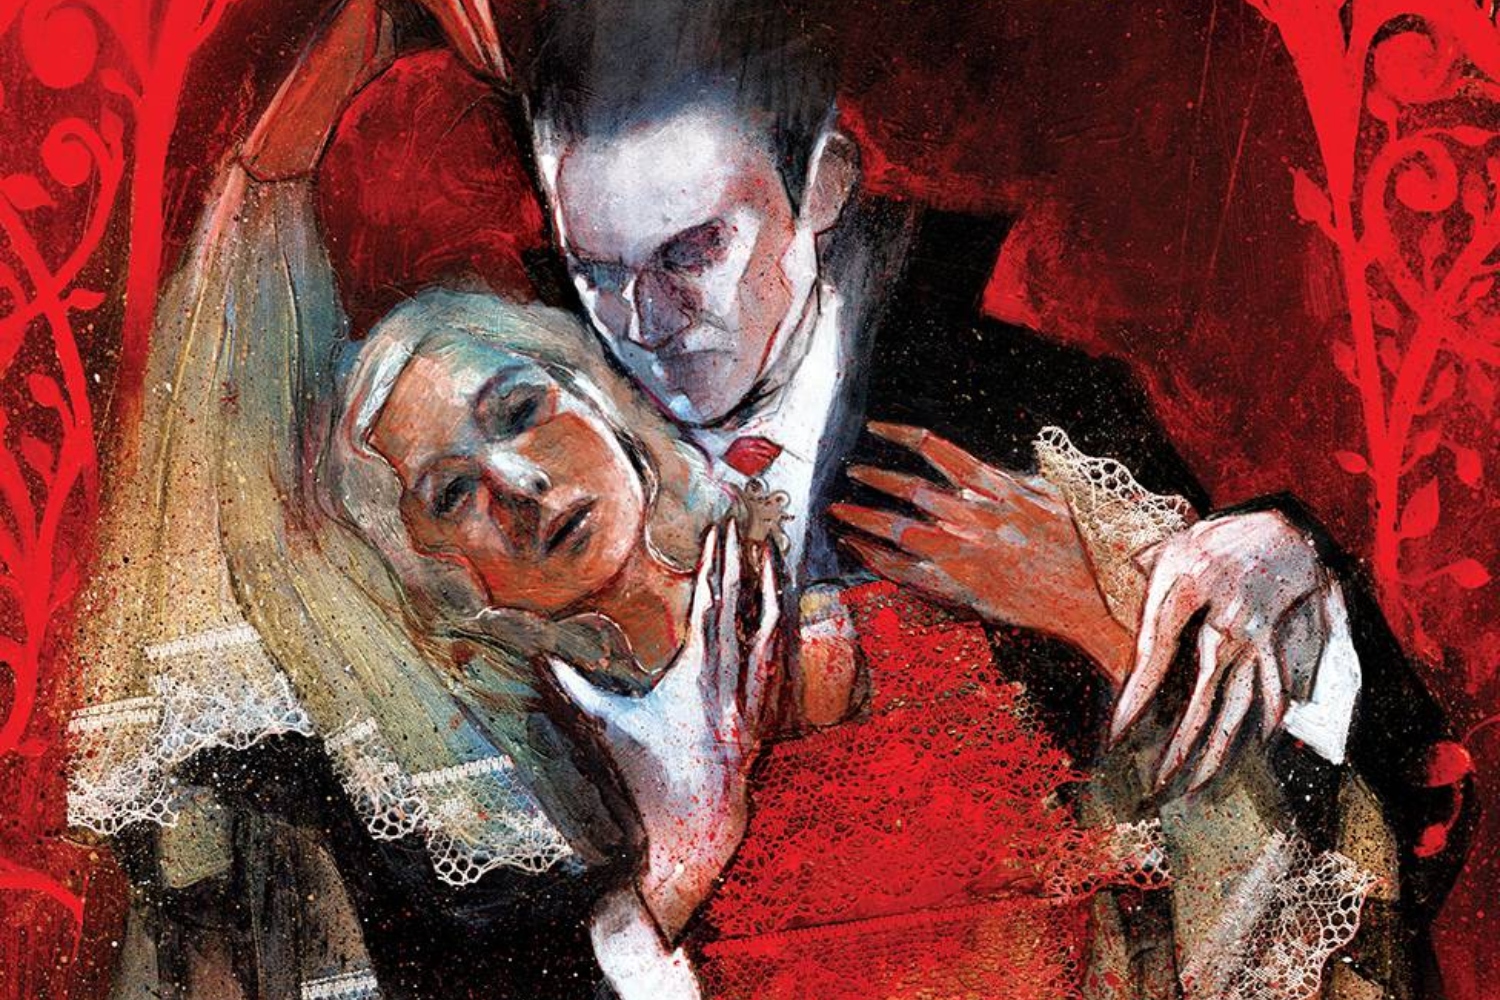 'Universal Monsters: Dracula' #1 will tear out your heart AND throat